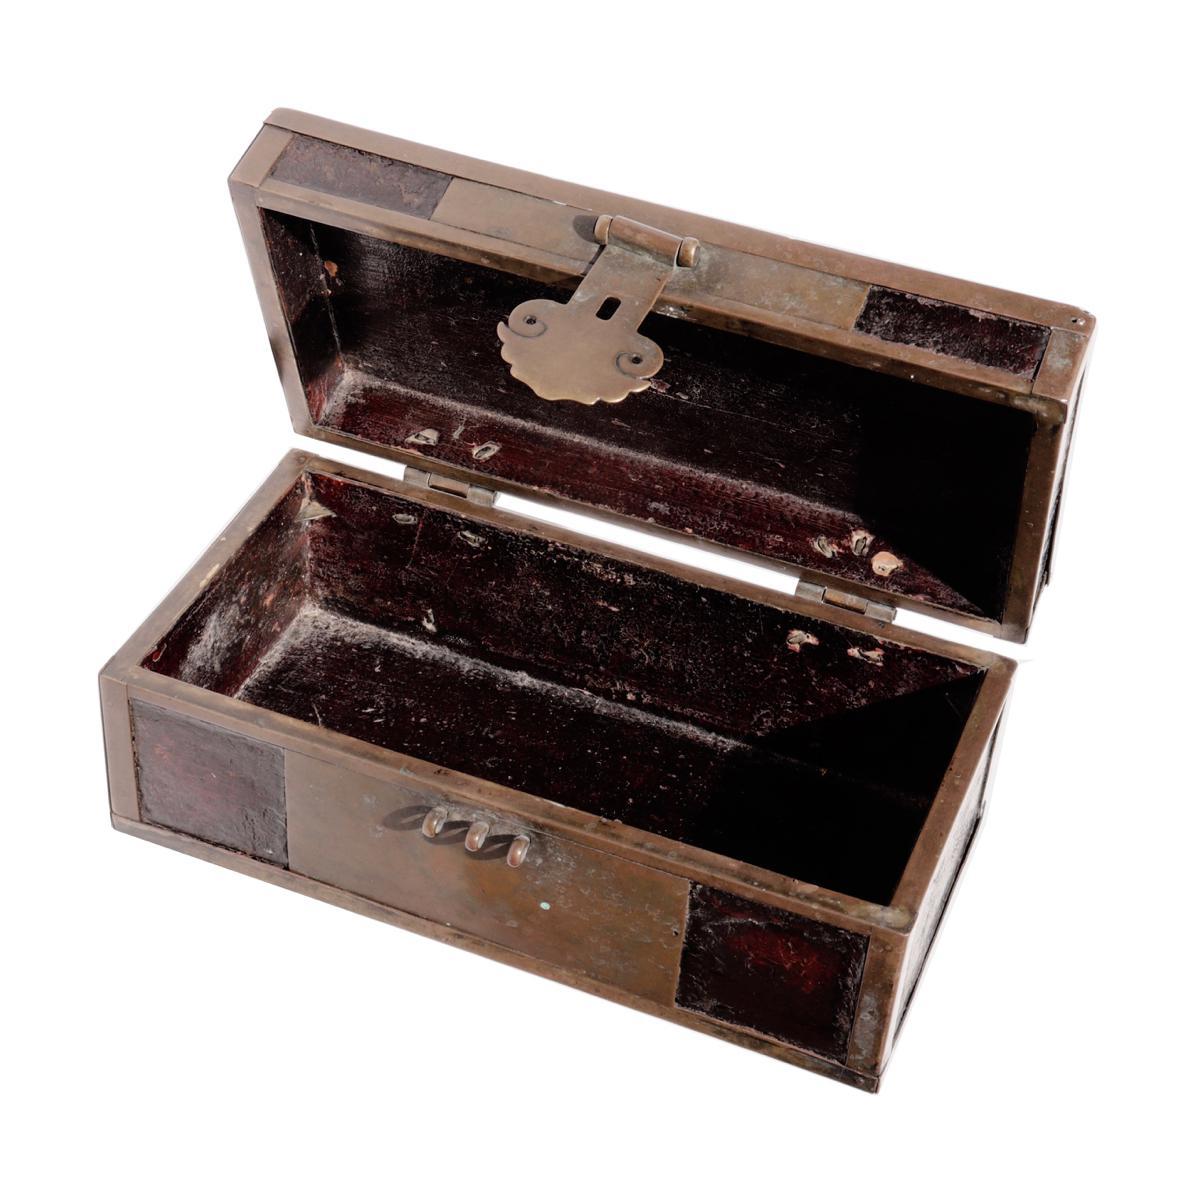 Chinese Brass and Lacquered Wood Box, simple wood box with a brass edgings and front lock plate, wood section covered in a dark lacquer, hinged top lid, front with large rectangular brass front plate with well-formed ling-chi shaped lock plate,